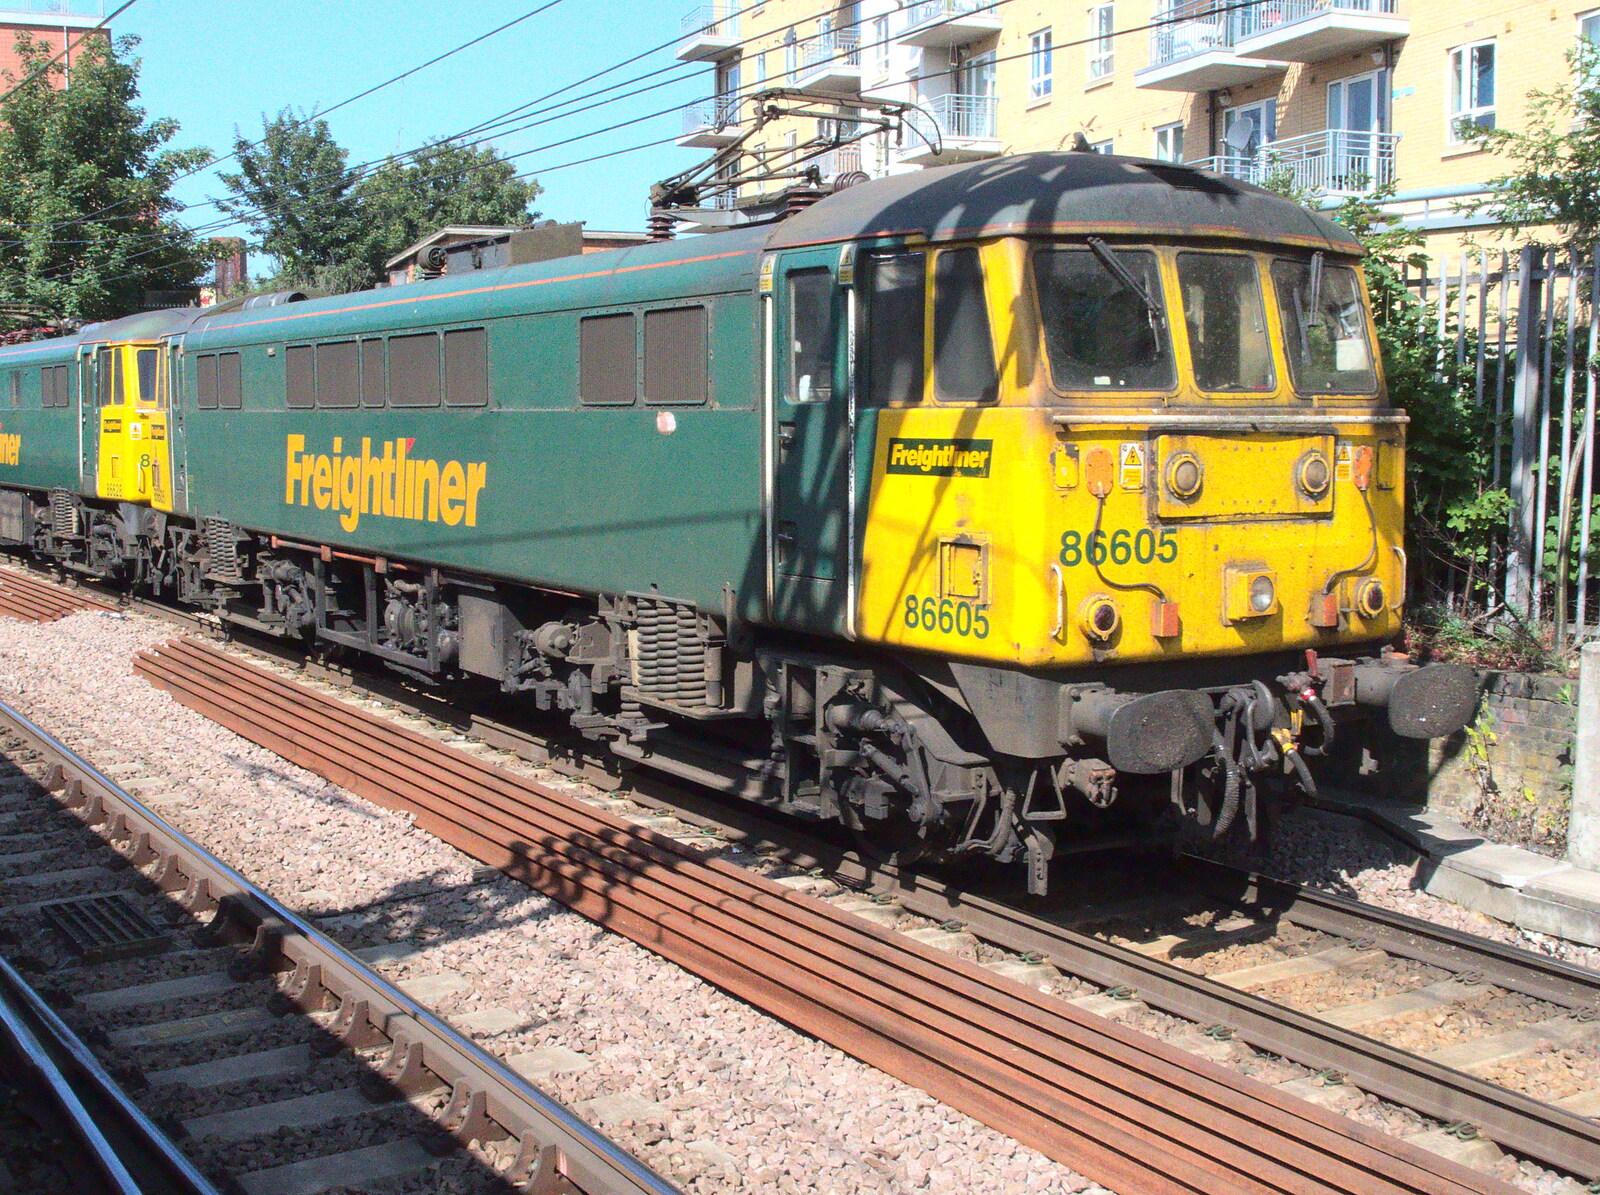 Ancient Class 86 loco 86605 rumbles past from A Week on the Rails, Stratford and Liverpool Street, London - 23rd July